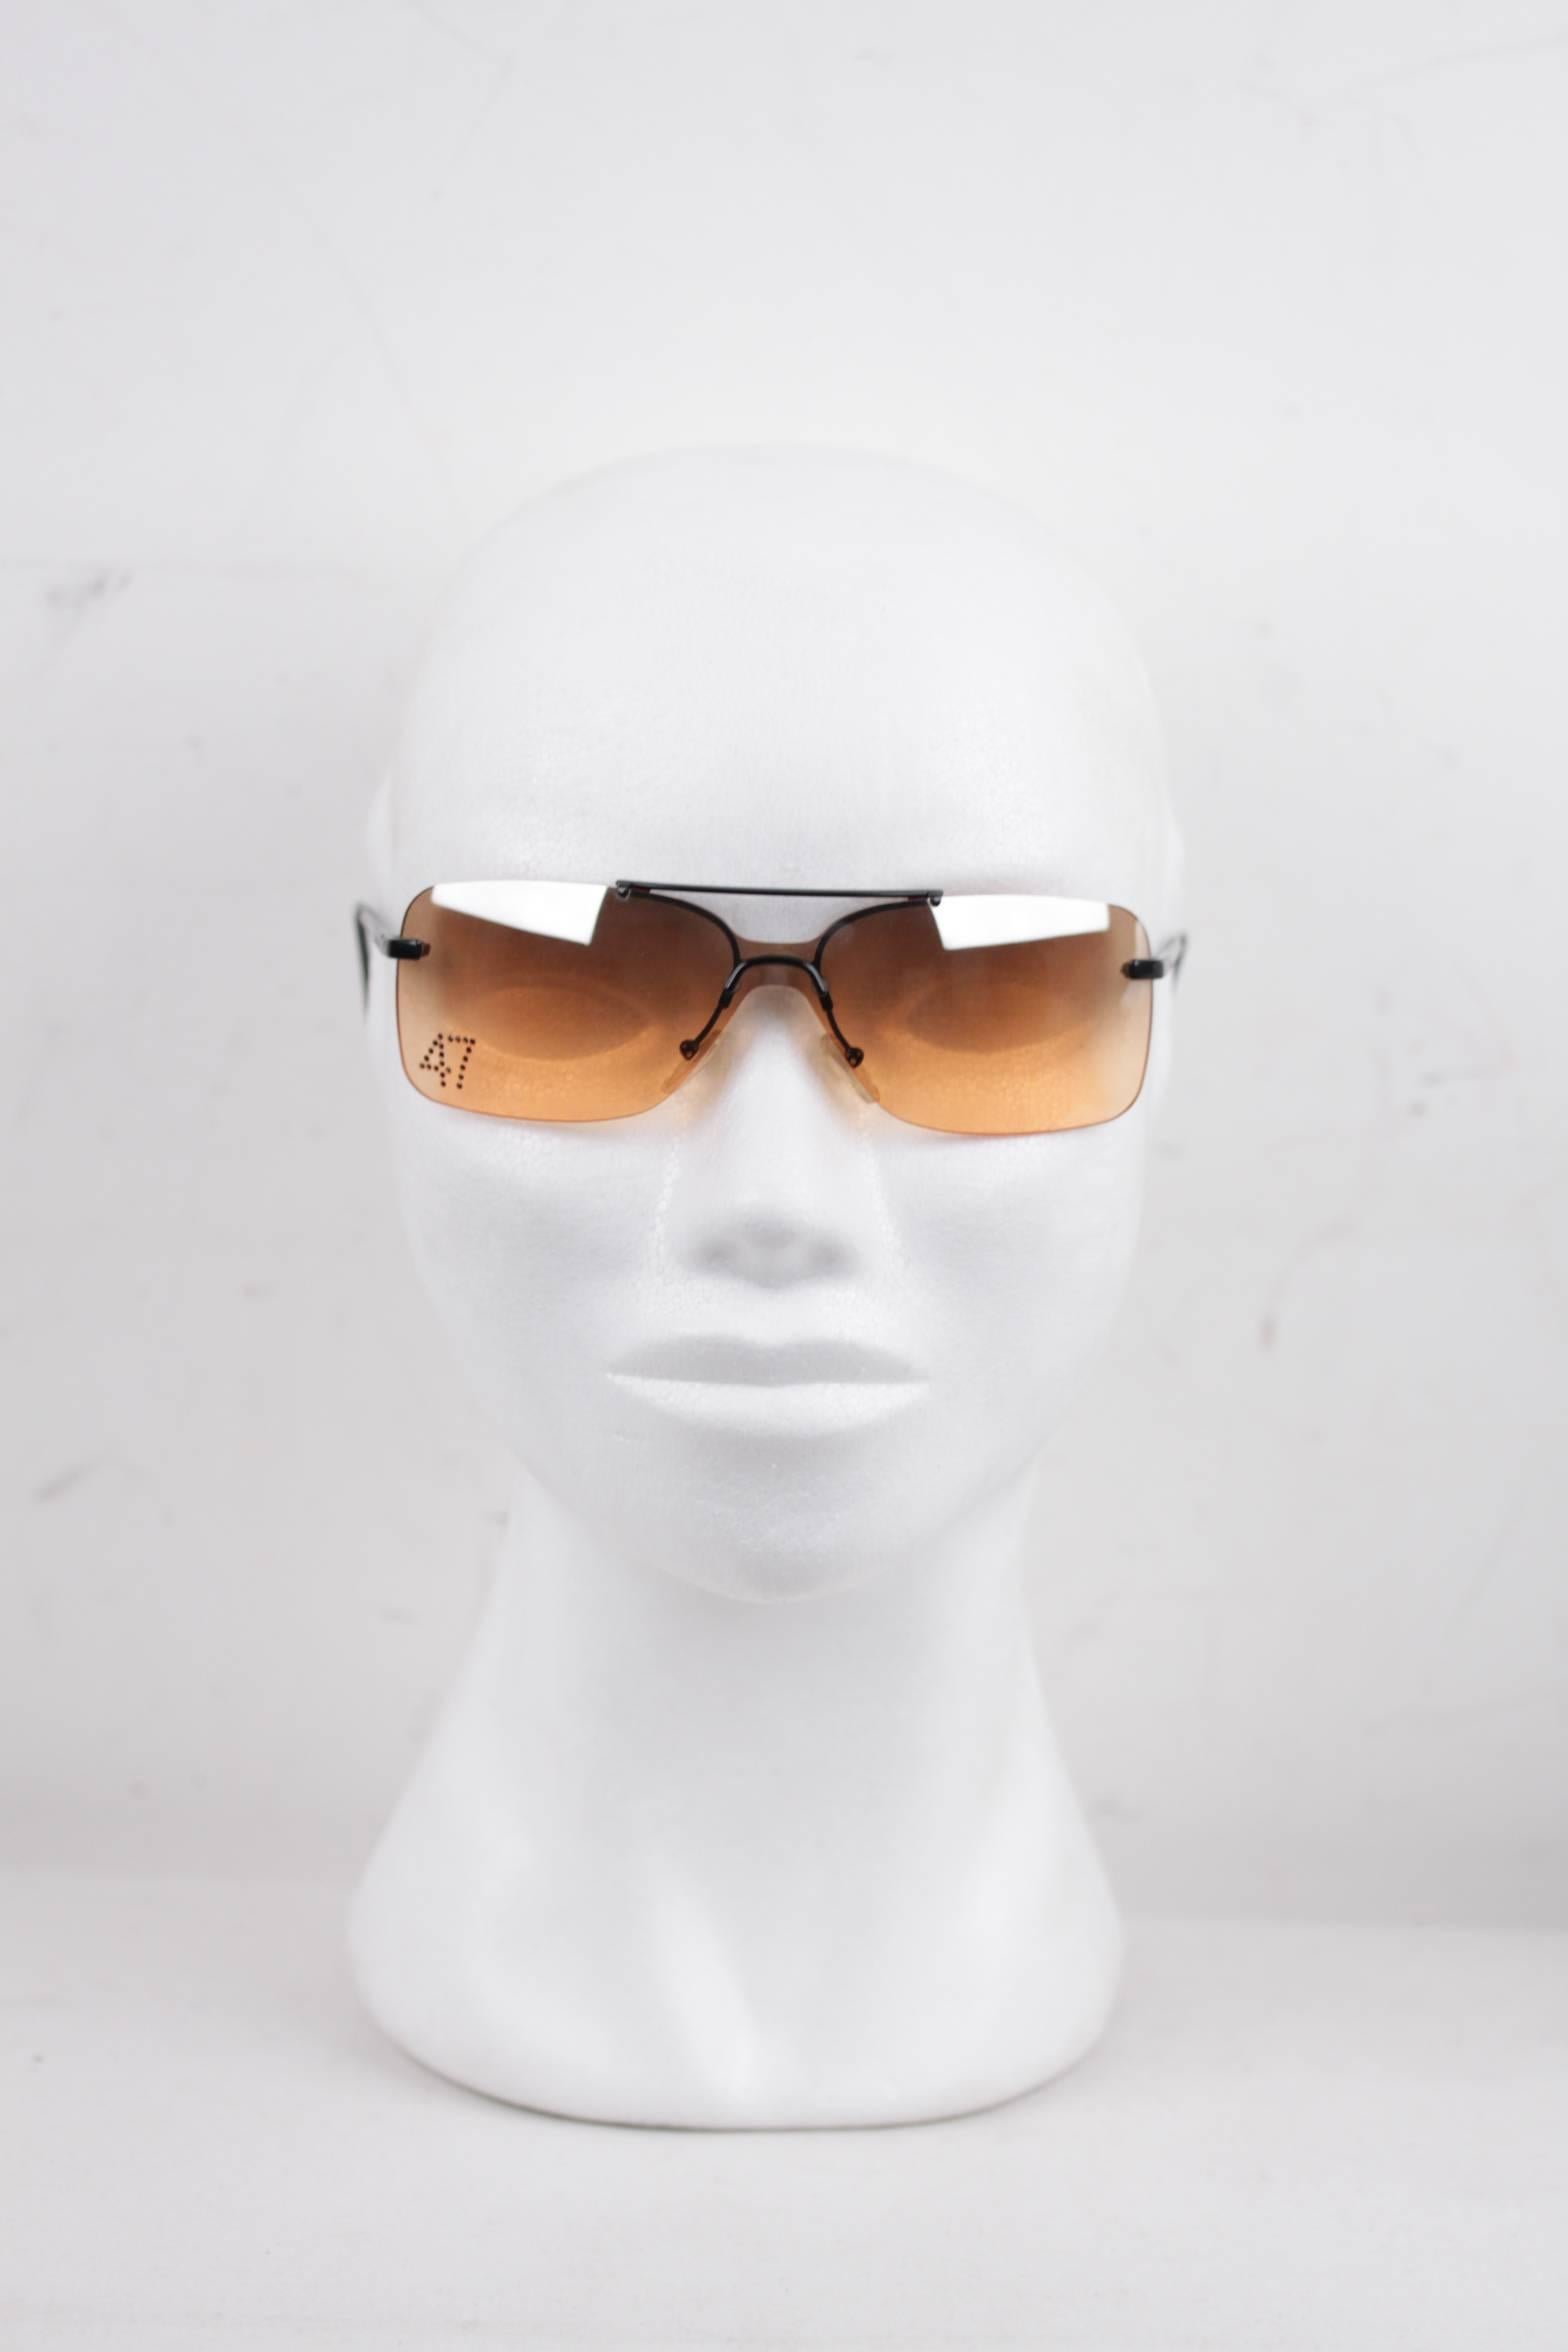 - CHRISTIAN DIOR - Made in Austria

- Style Name & Number: DIOR 47 - 90C - 125

- Rimeless frame with black metal arms

- CHRISTAIN DIOR signature engraved on temples

- Gradient/Faded orange one-piece lens

- '47' number made in small